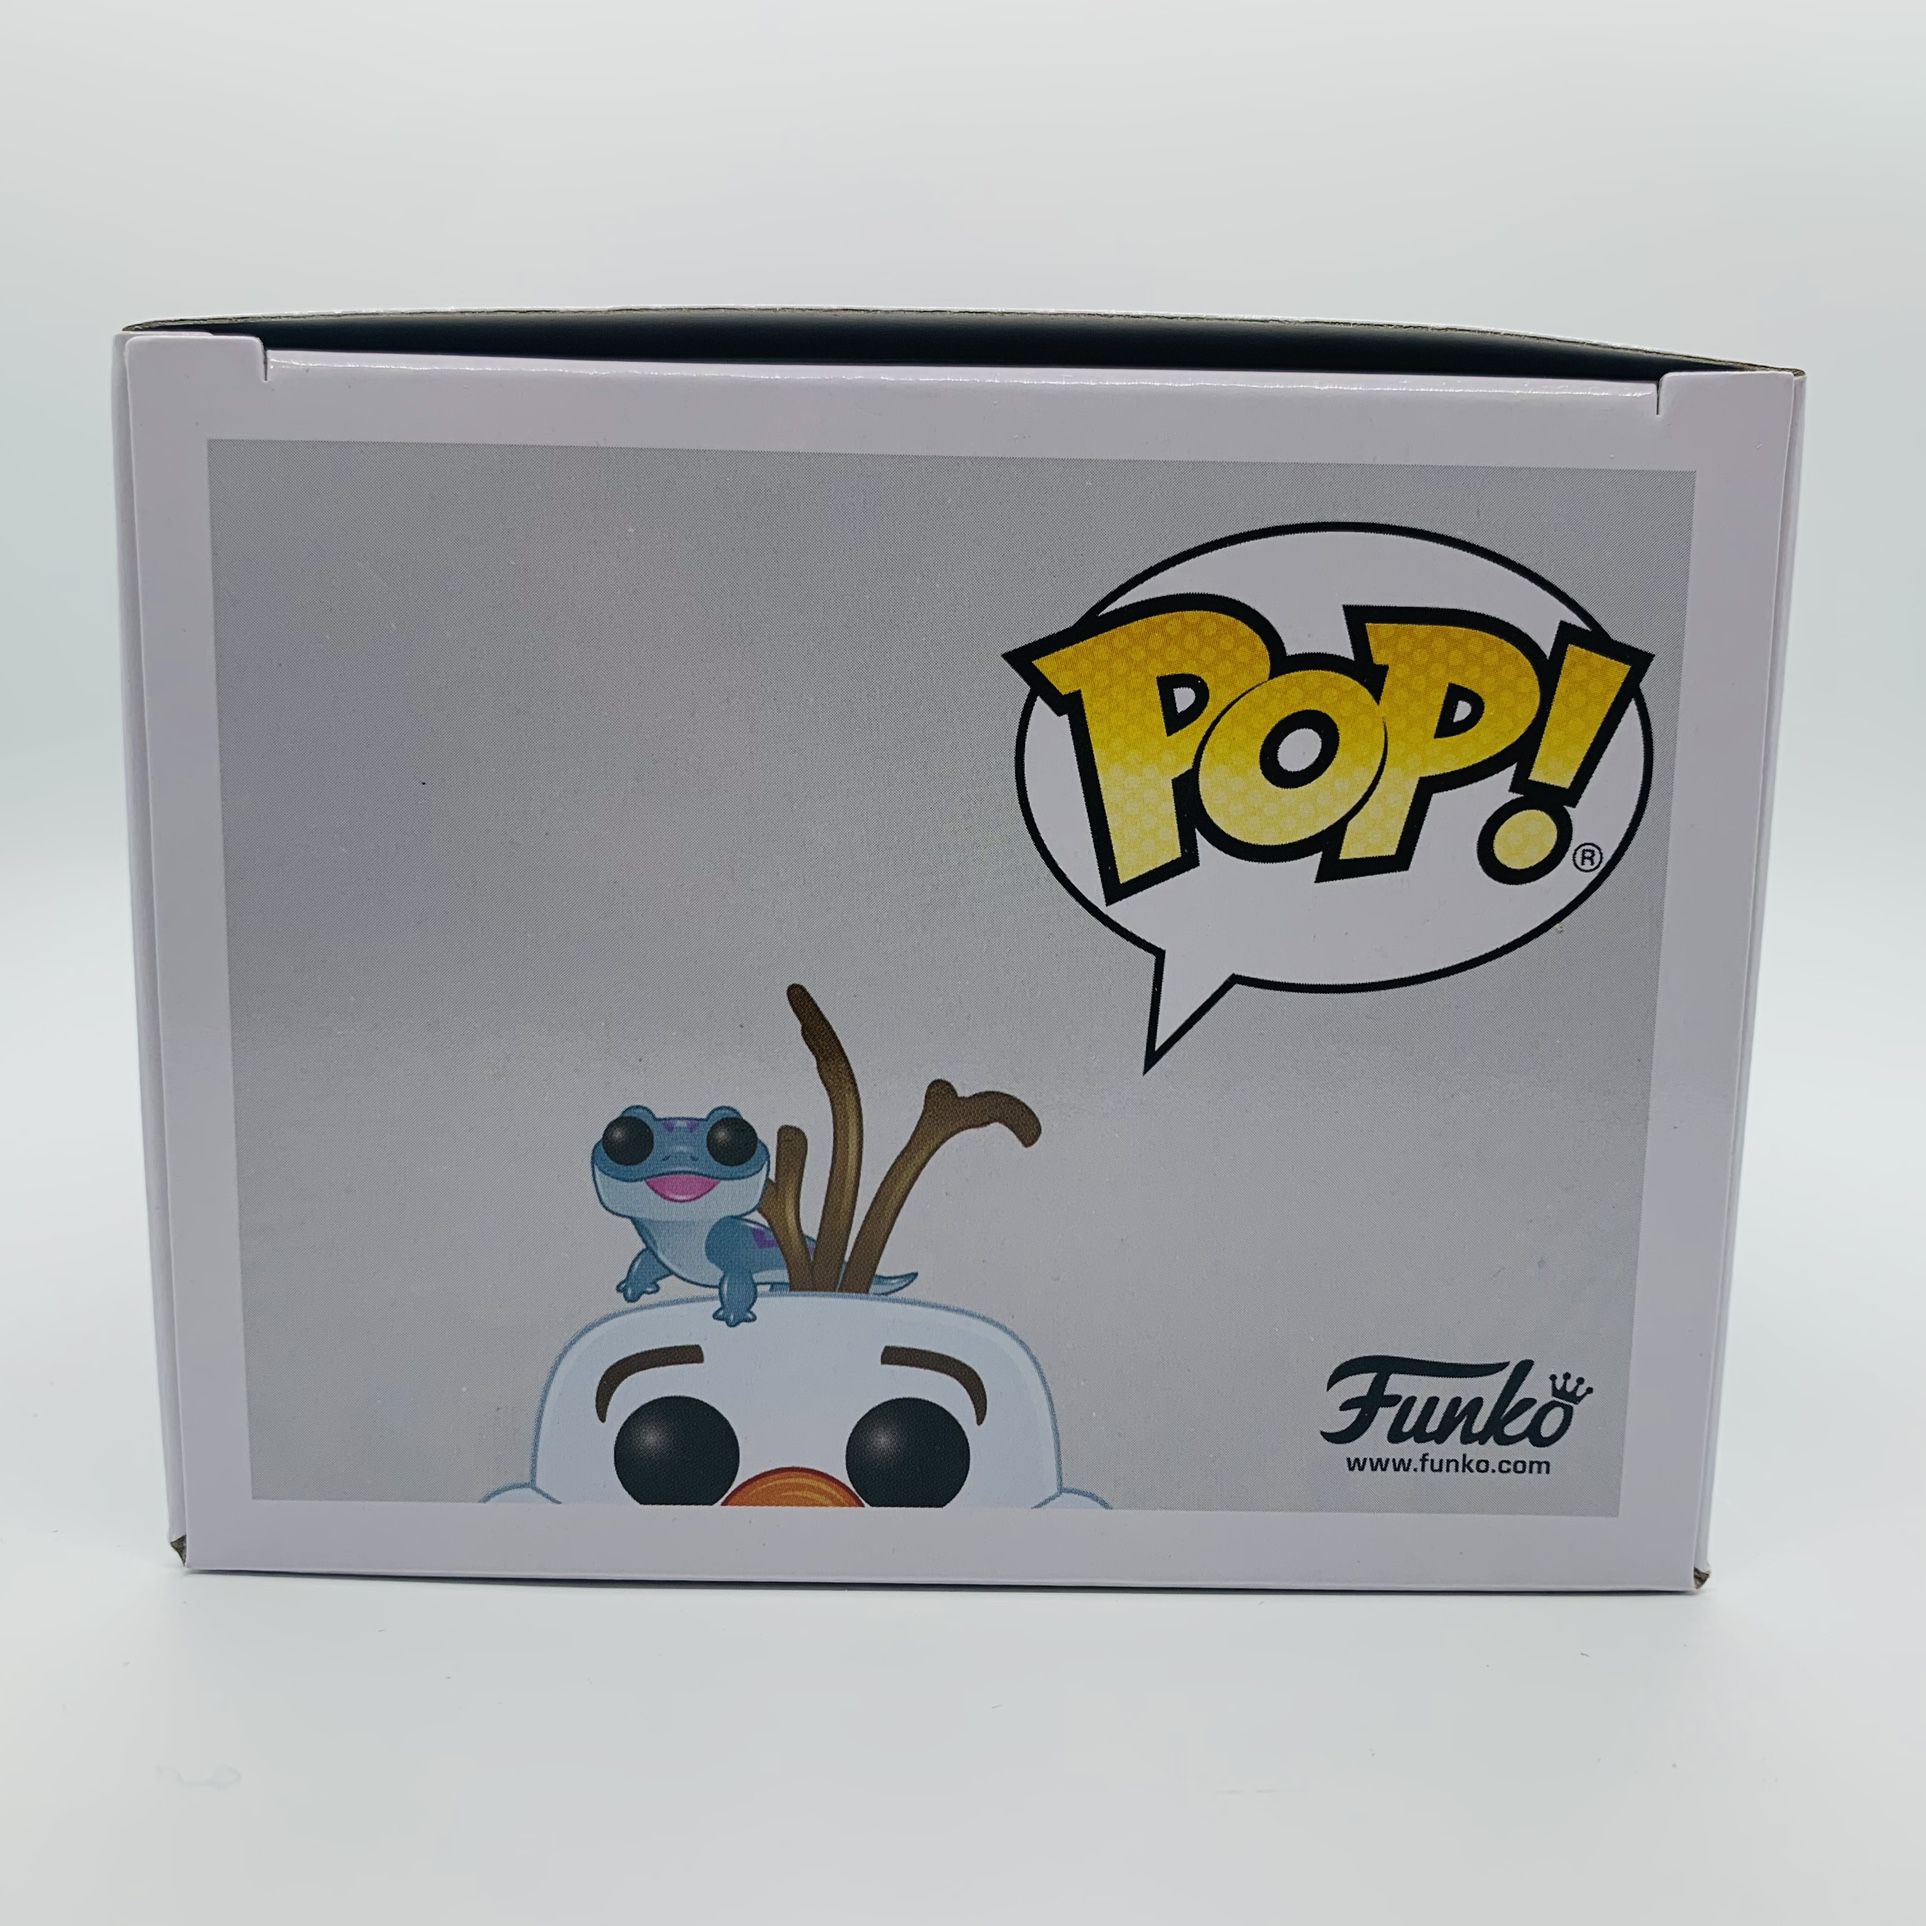 Funko POP! Disney Frozen II Olaf With Bruni #733 - Magnote Gifts